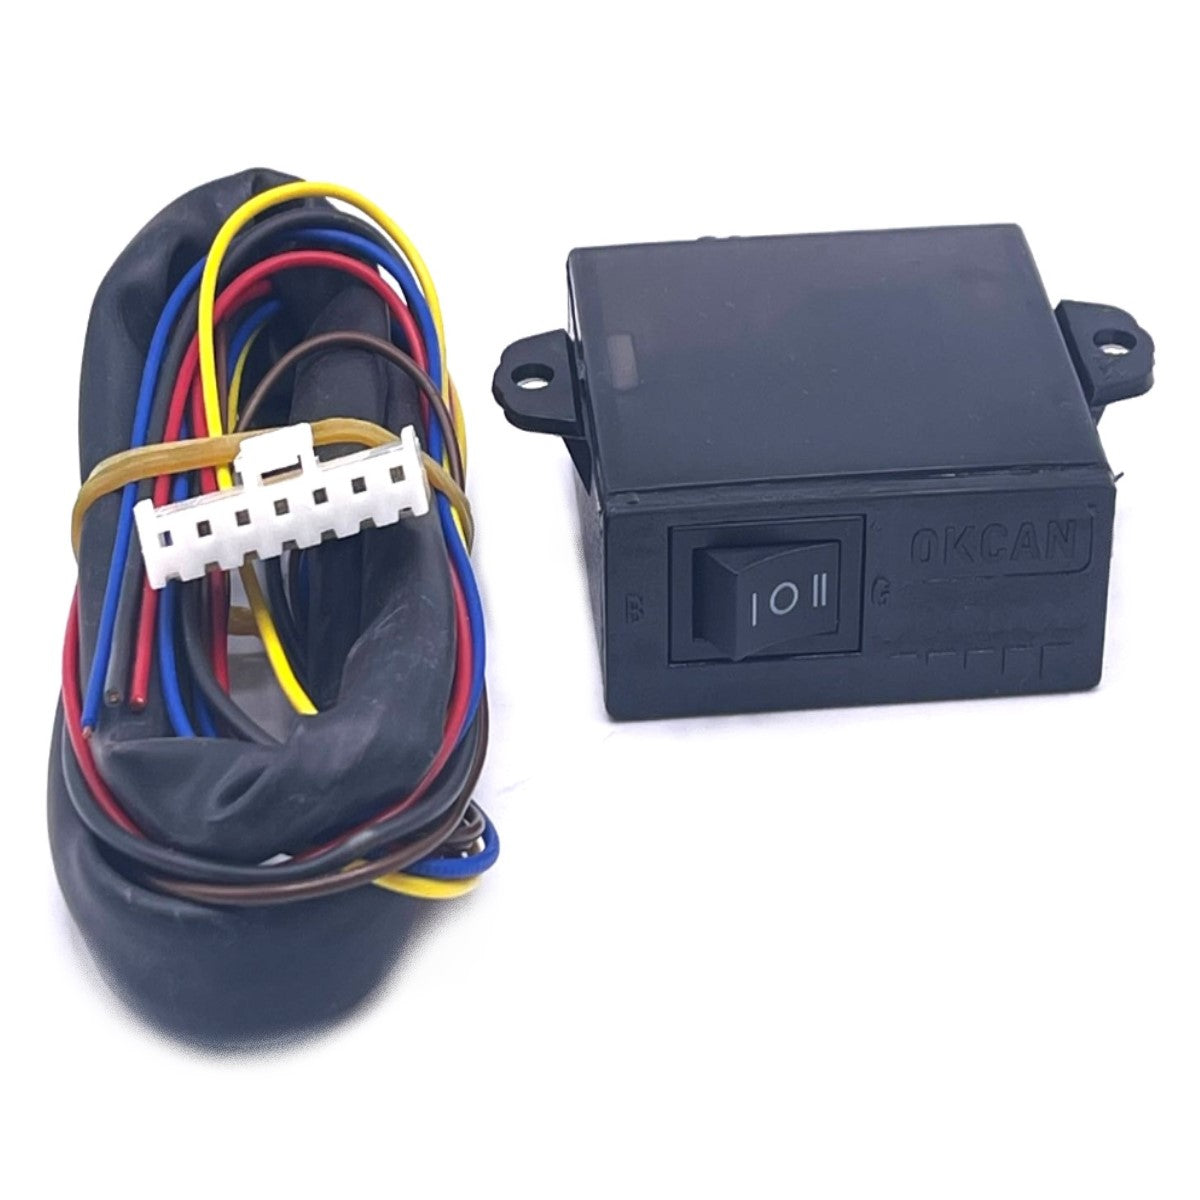 Gas LPG FUEL Switch for carburetted cars and forklifts.